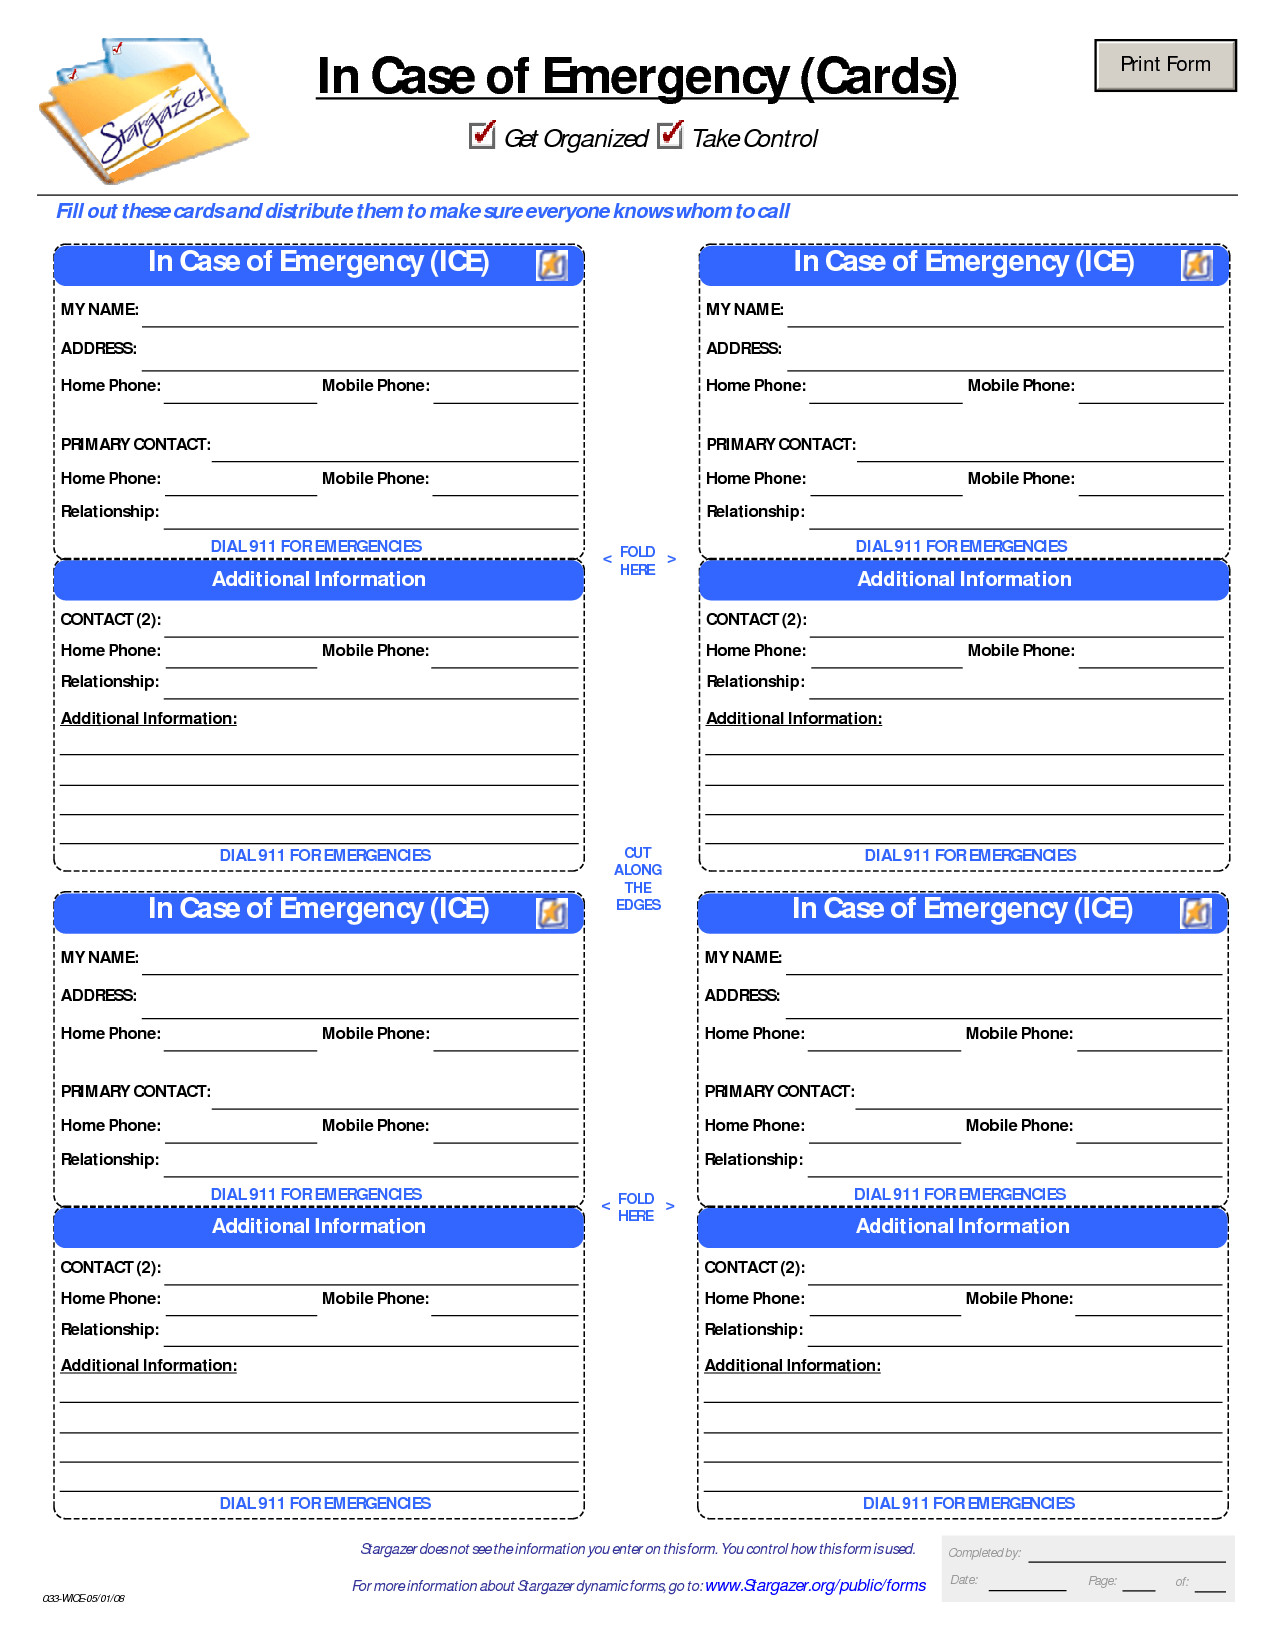 ID Card Template In Case of Emergency Cards